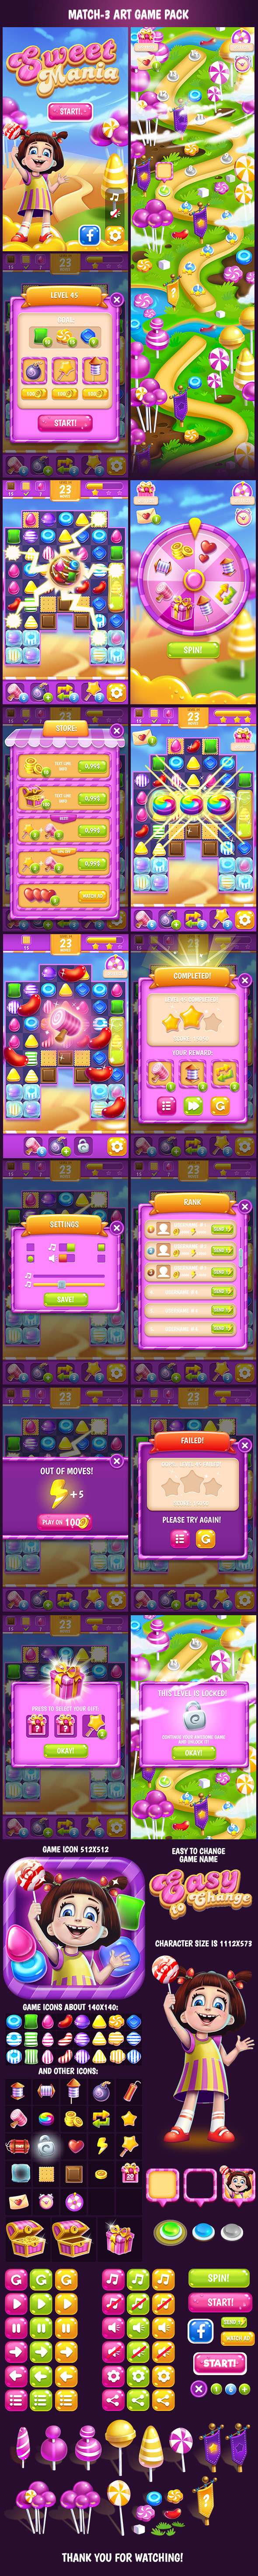 GUI match3 match-3 sweet game game android UI GUI game interface Candy Game